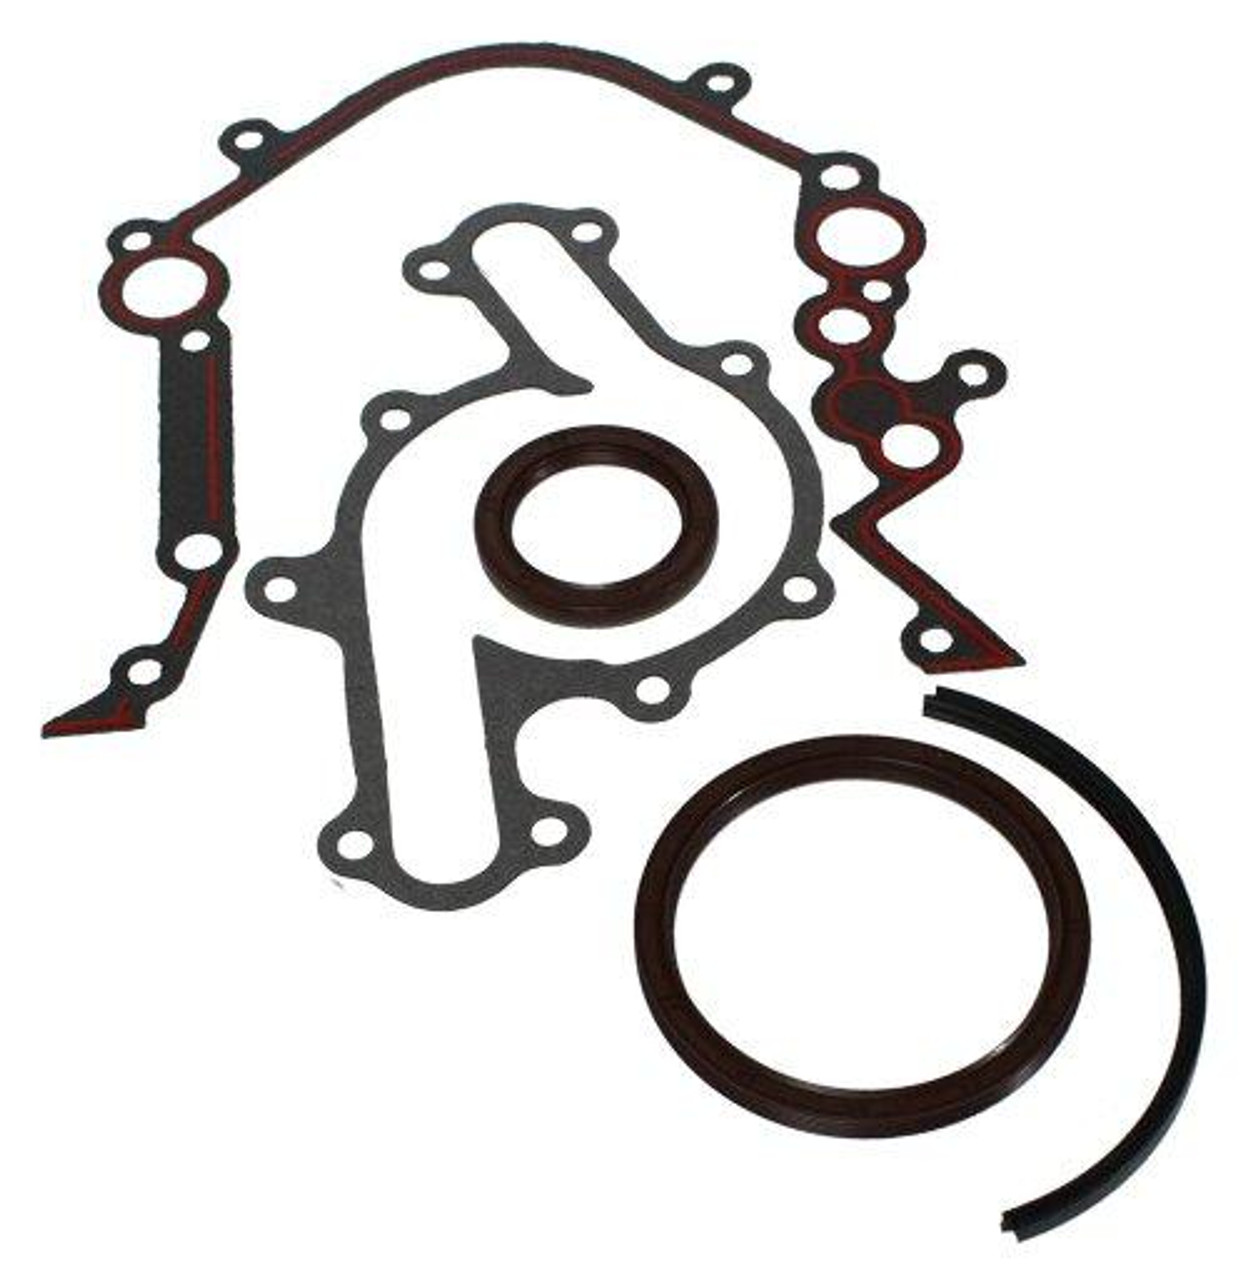 Lower Gasket Set - 1996 Ford Thunderbird 3.8L Engine Parts # LGS4122ZE11